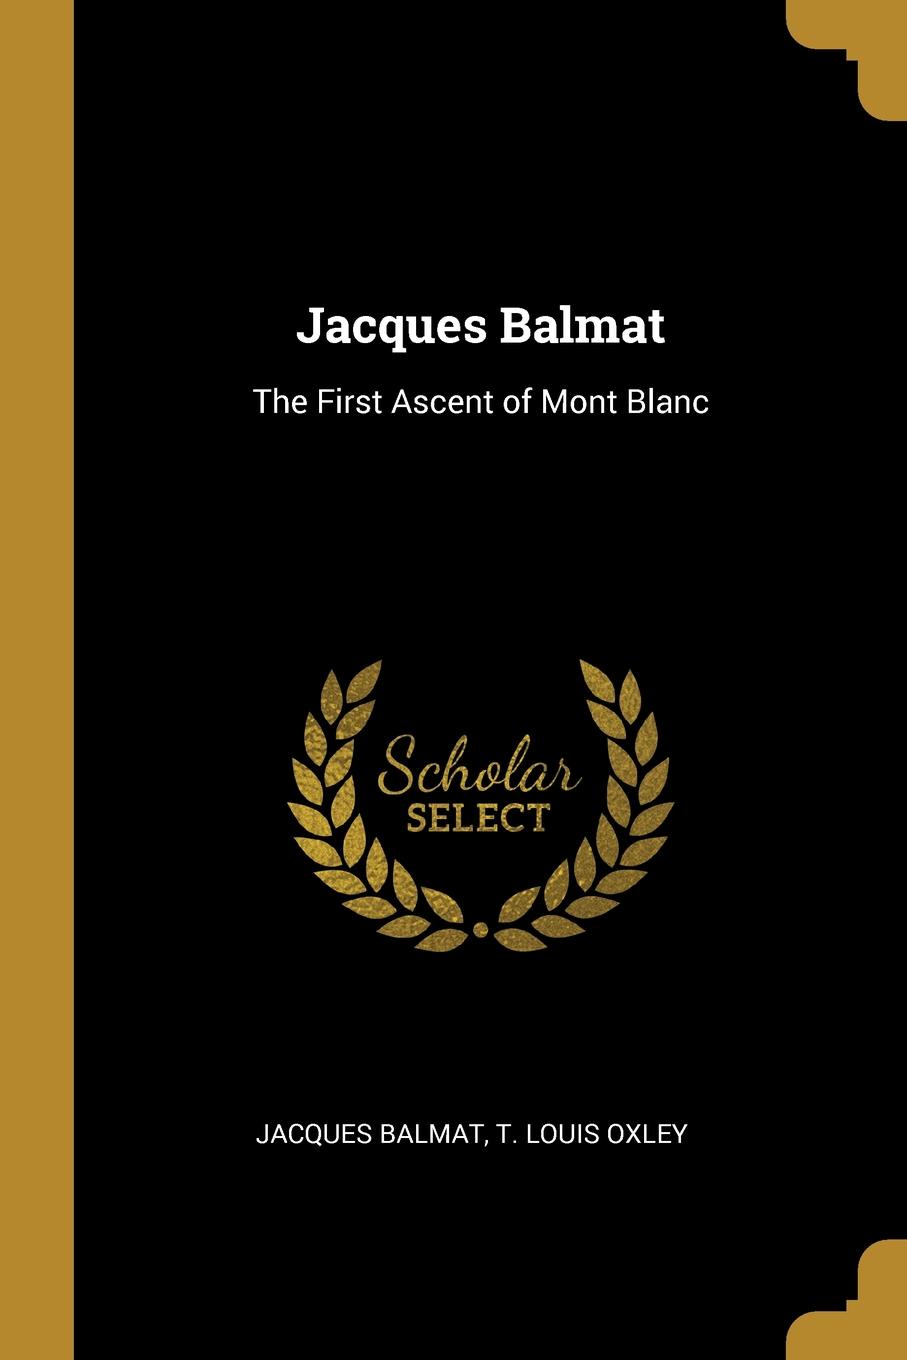 Jacques Balmat. The First Ascent of Mont Blanc